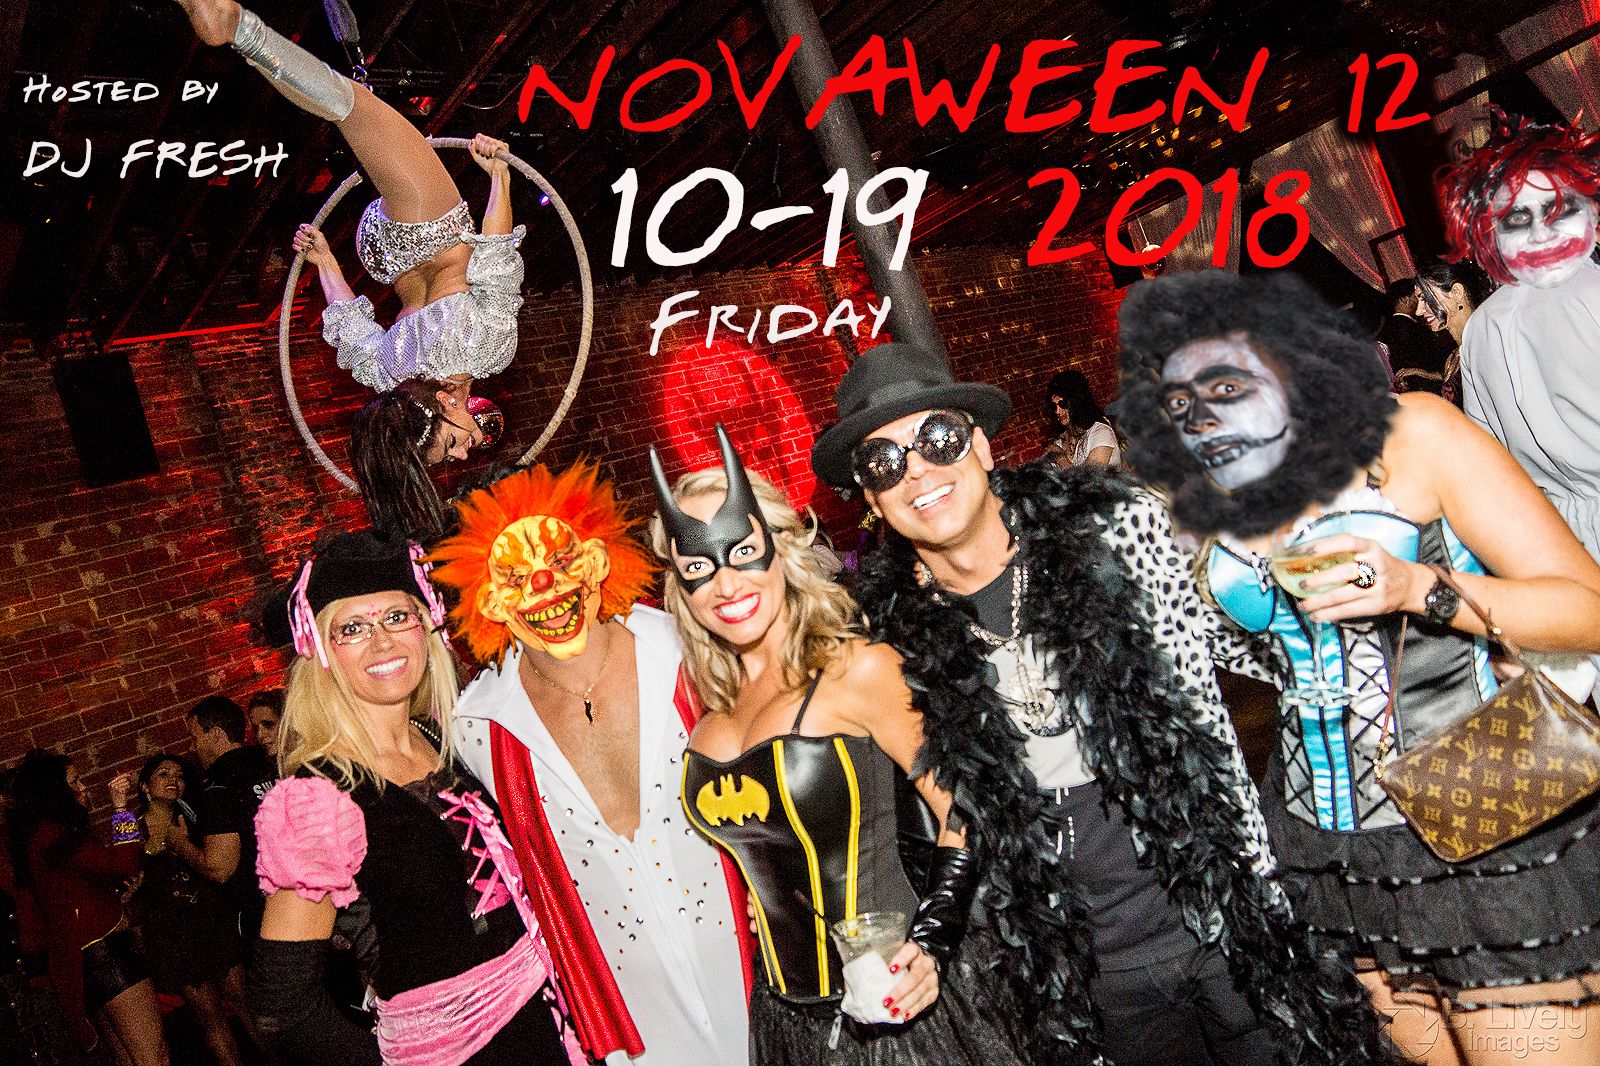 2018 Friday October 19 is Novaween 12 Halloween Party at NOVA 535 Downtown St Pete